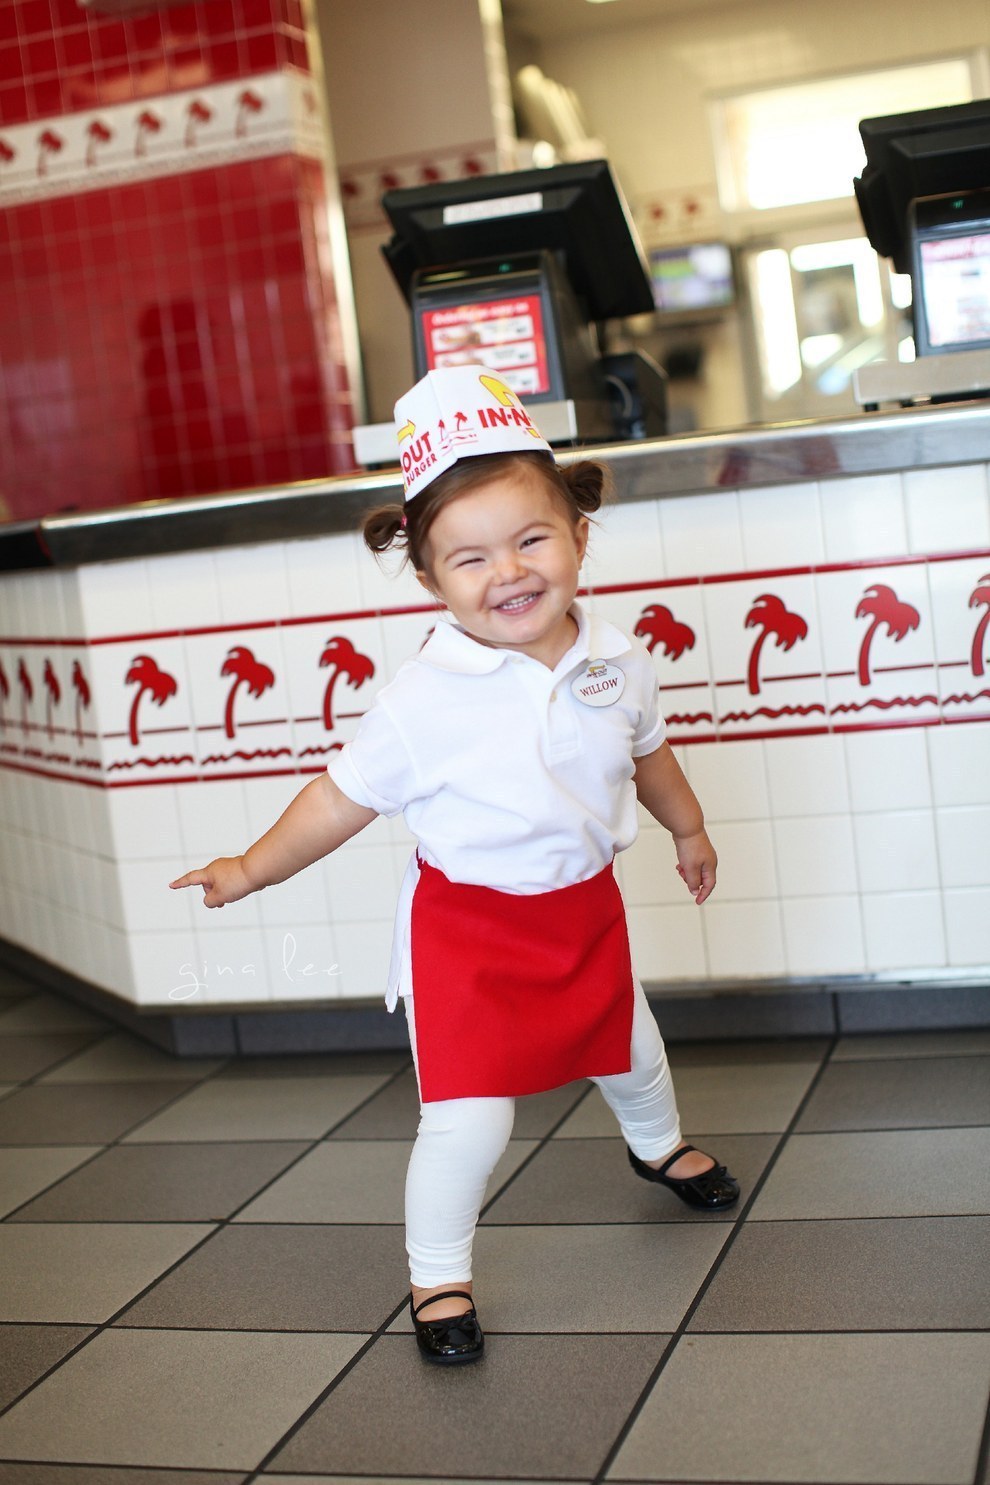 An In-N-Out employee…